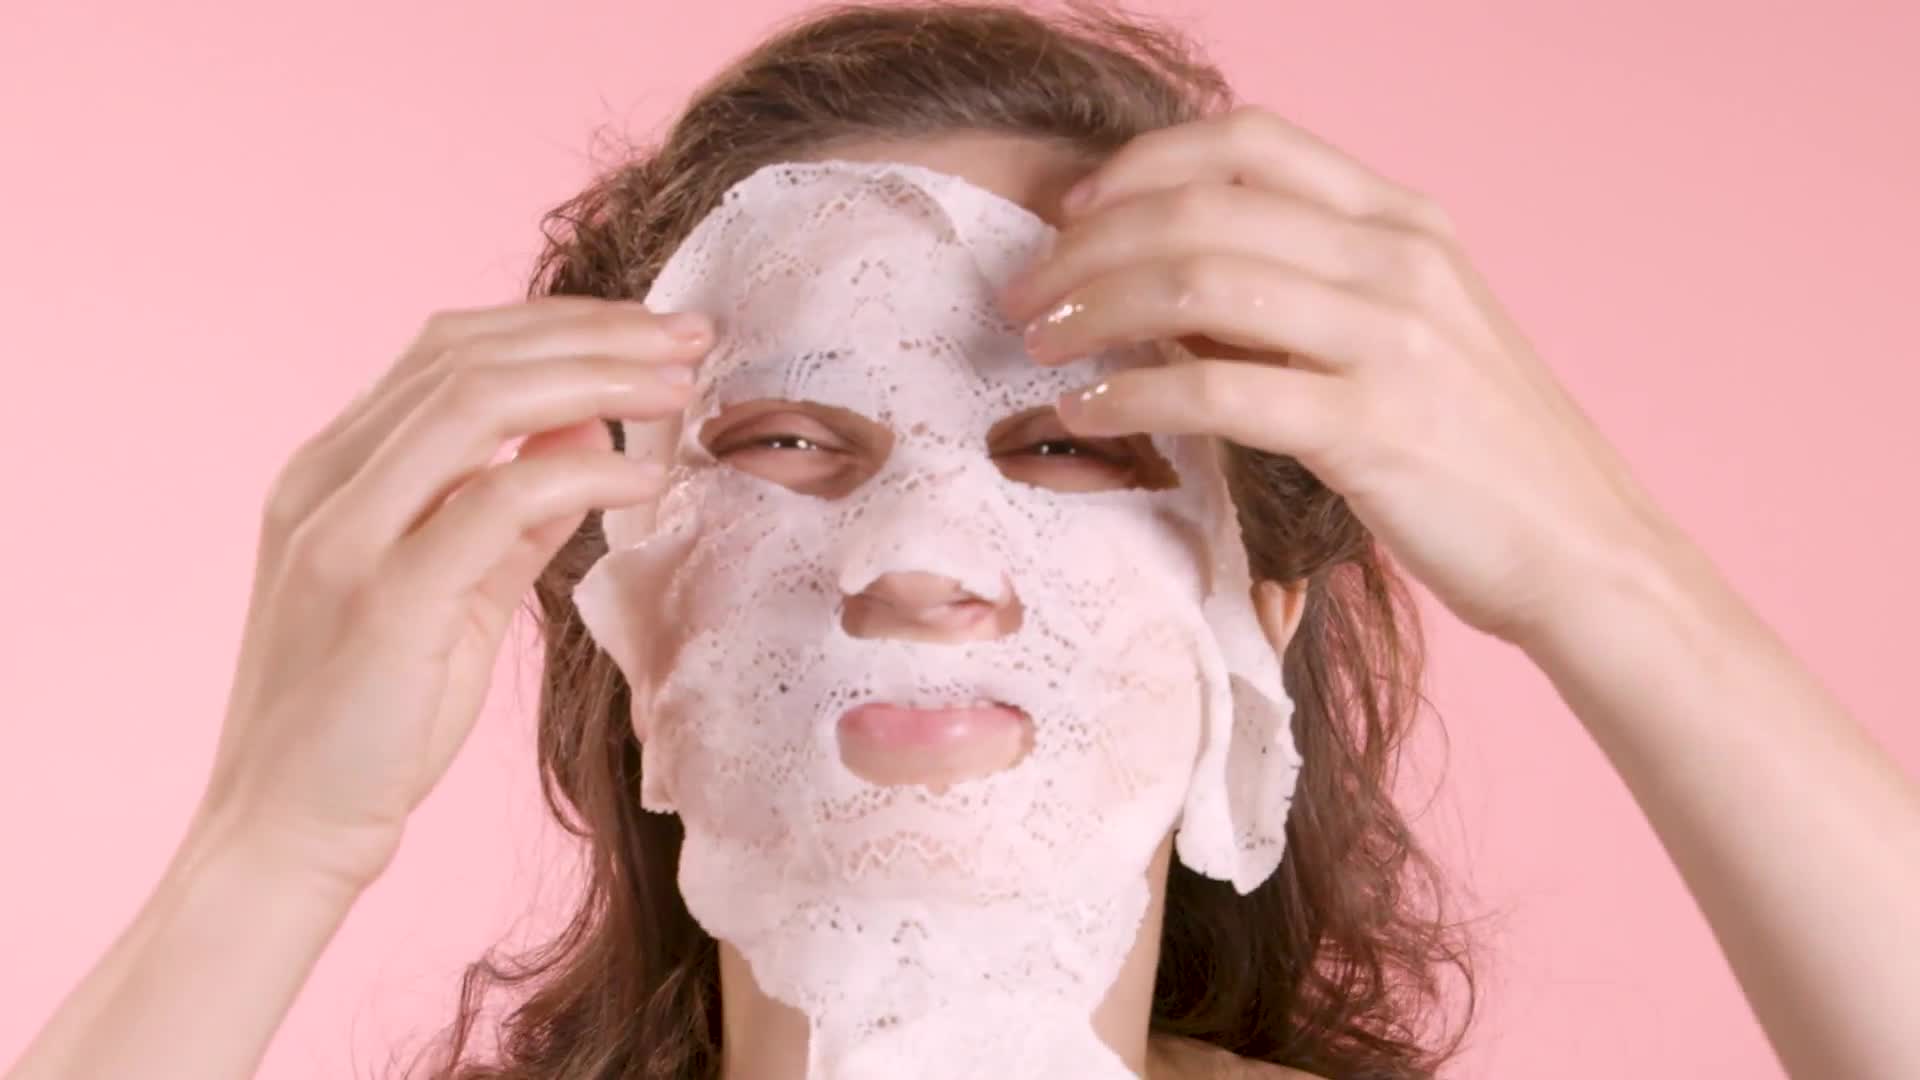 Watch We Tried This Lifting Sheet Mask Made of Lace